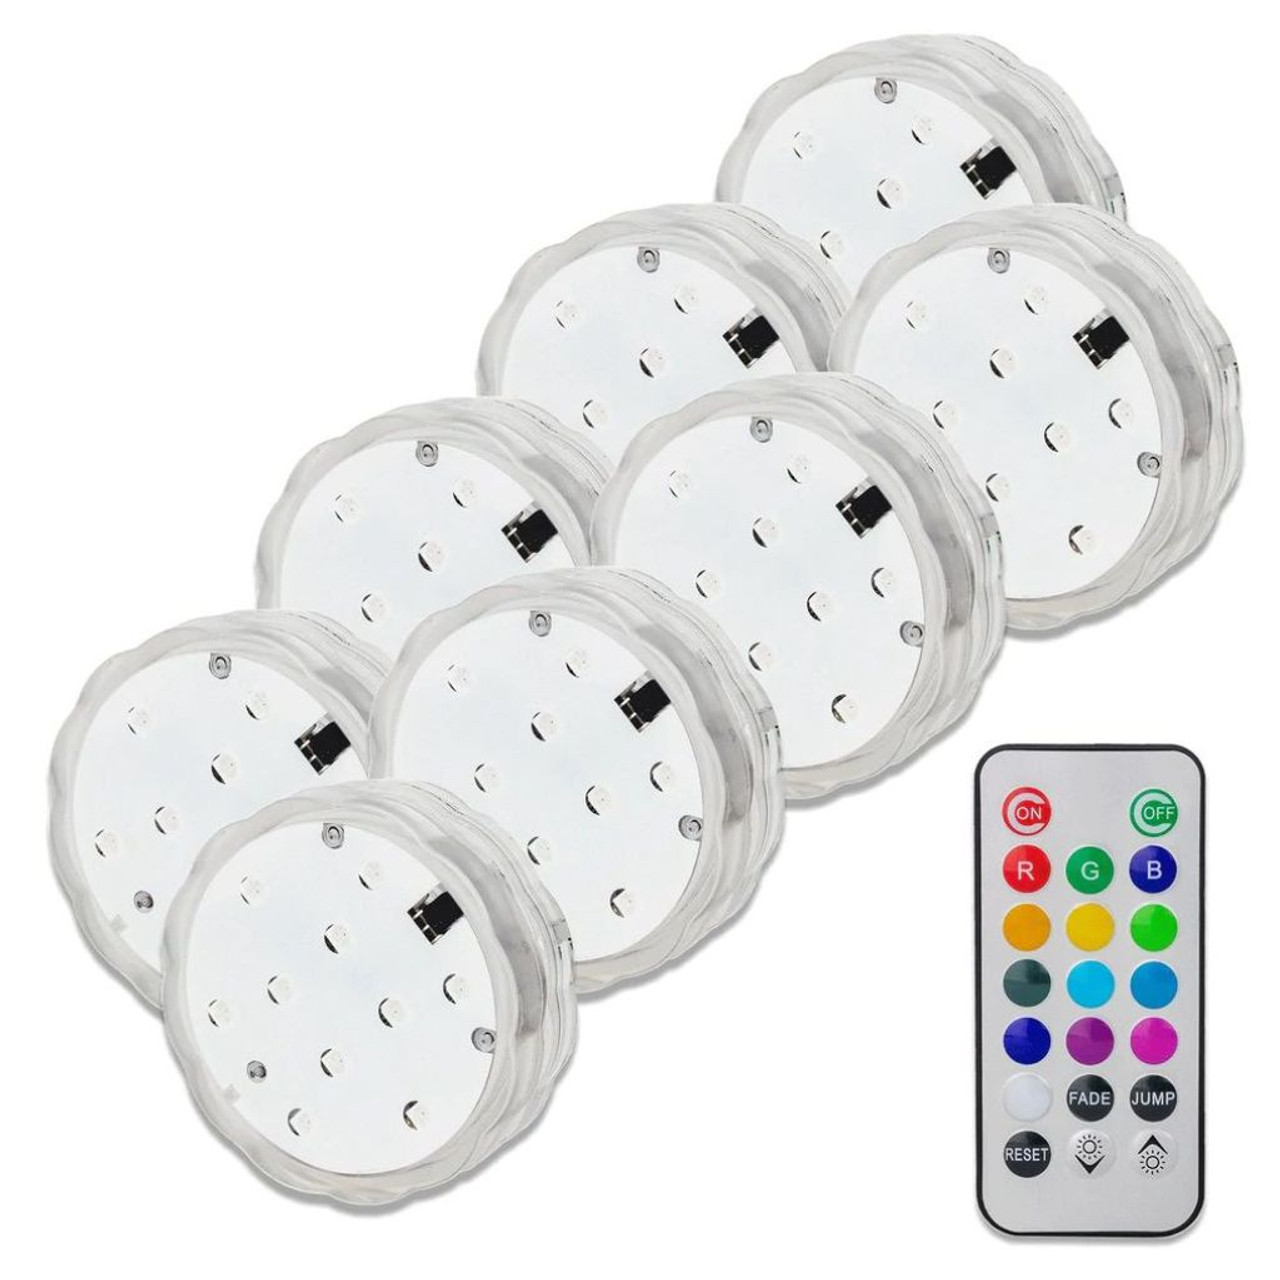 Multicolor Accent Submersible Waterproof LED Light (4-Pack) product image